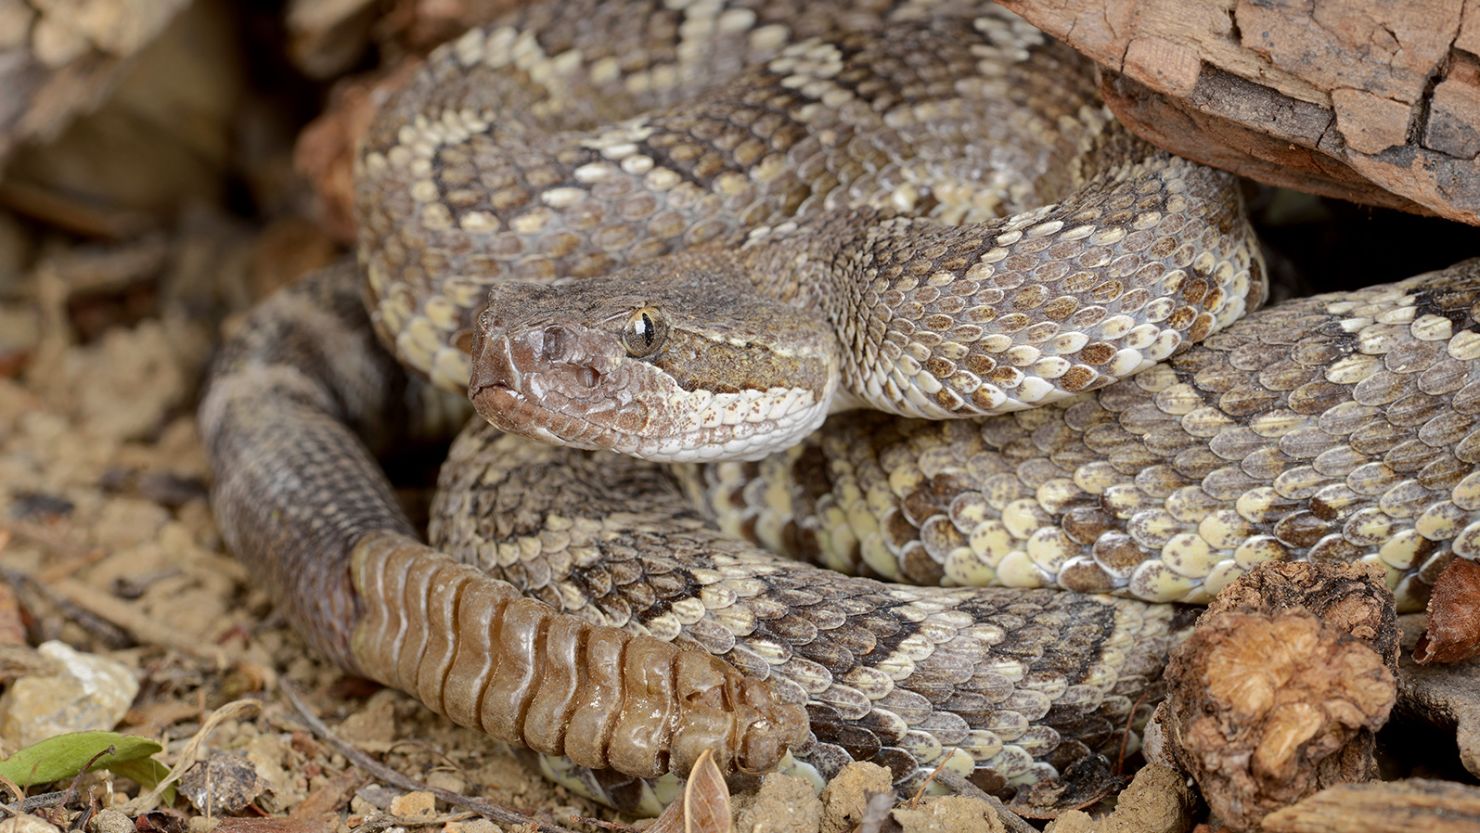 Snakes may comfort each other when stressed, new study finds